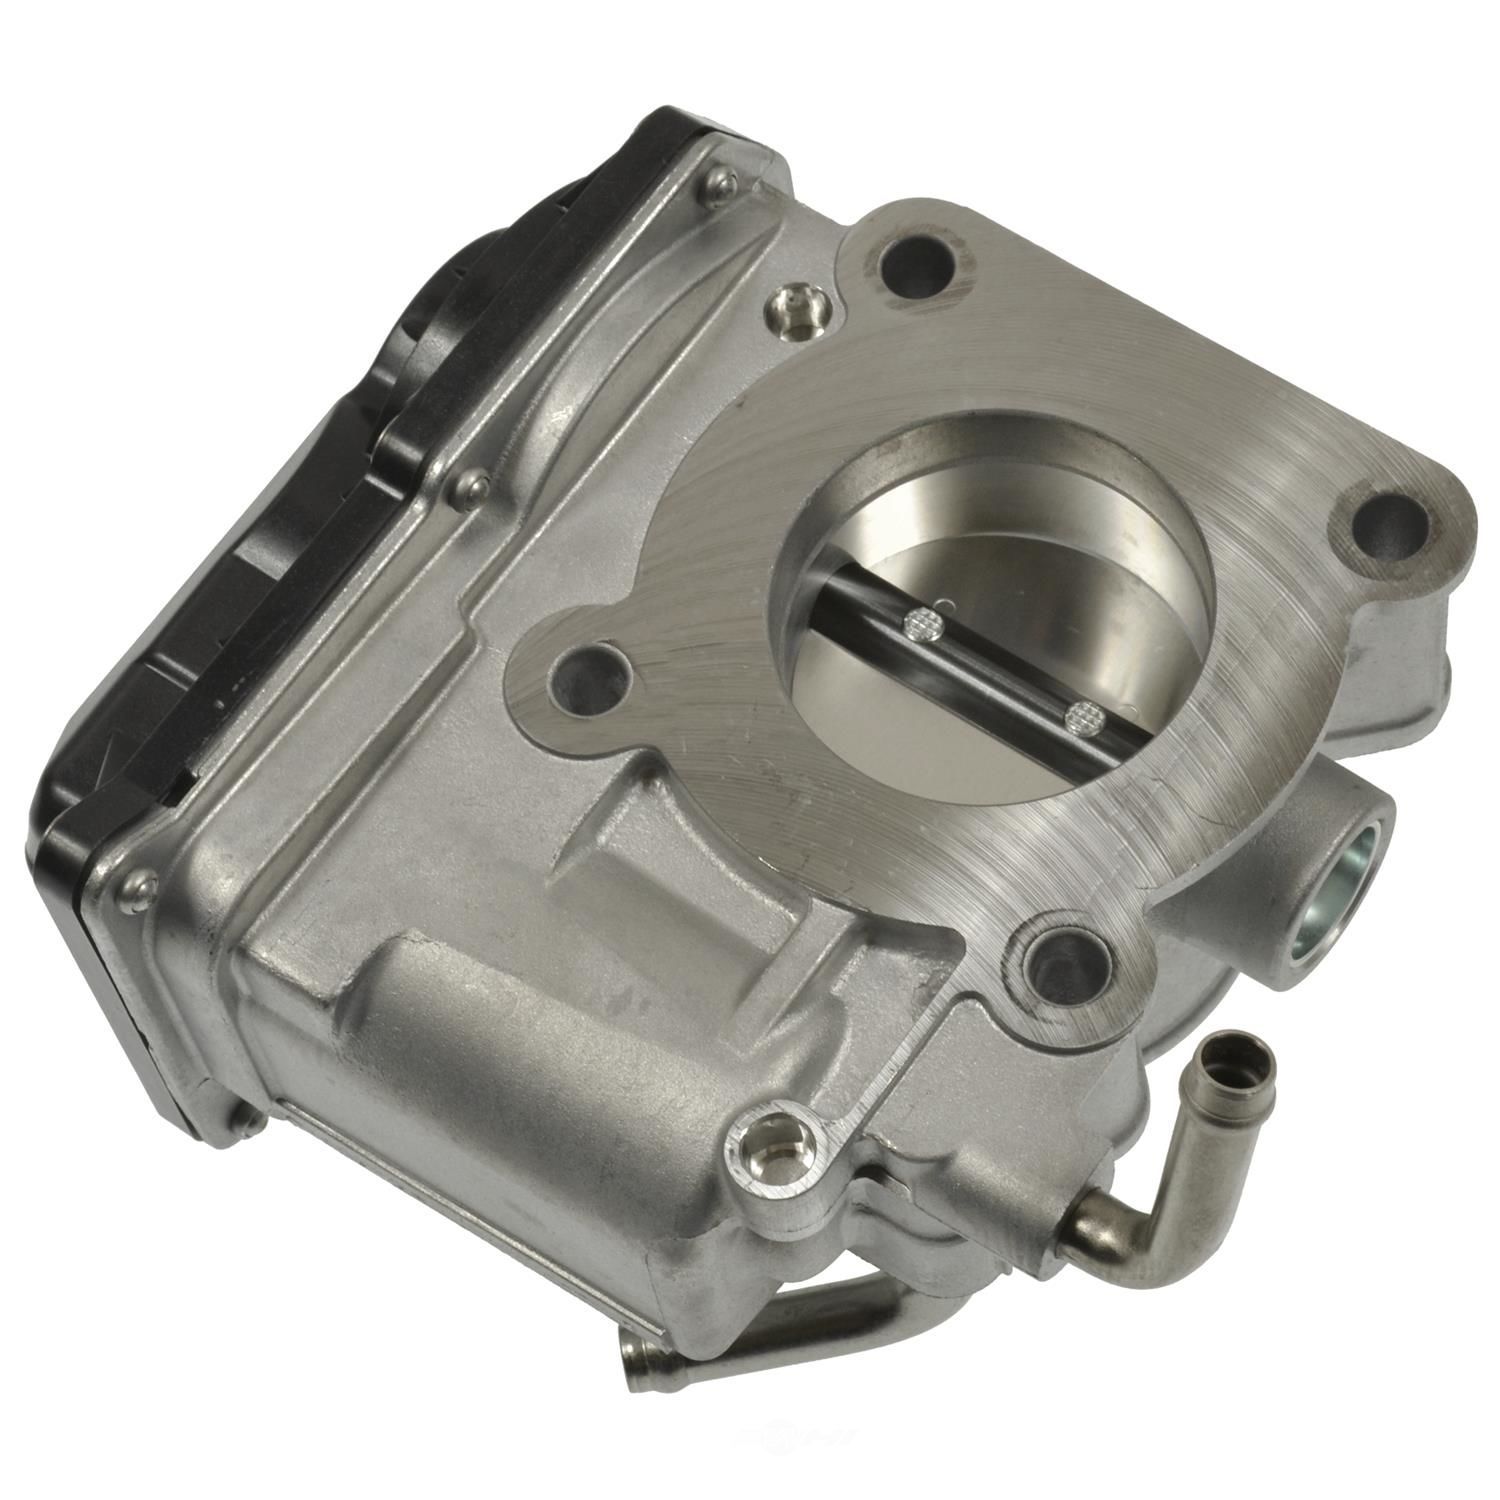 TECHSMART - Fuel Injection Throttle Body Assembly - TCS S20125